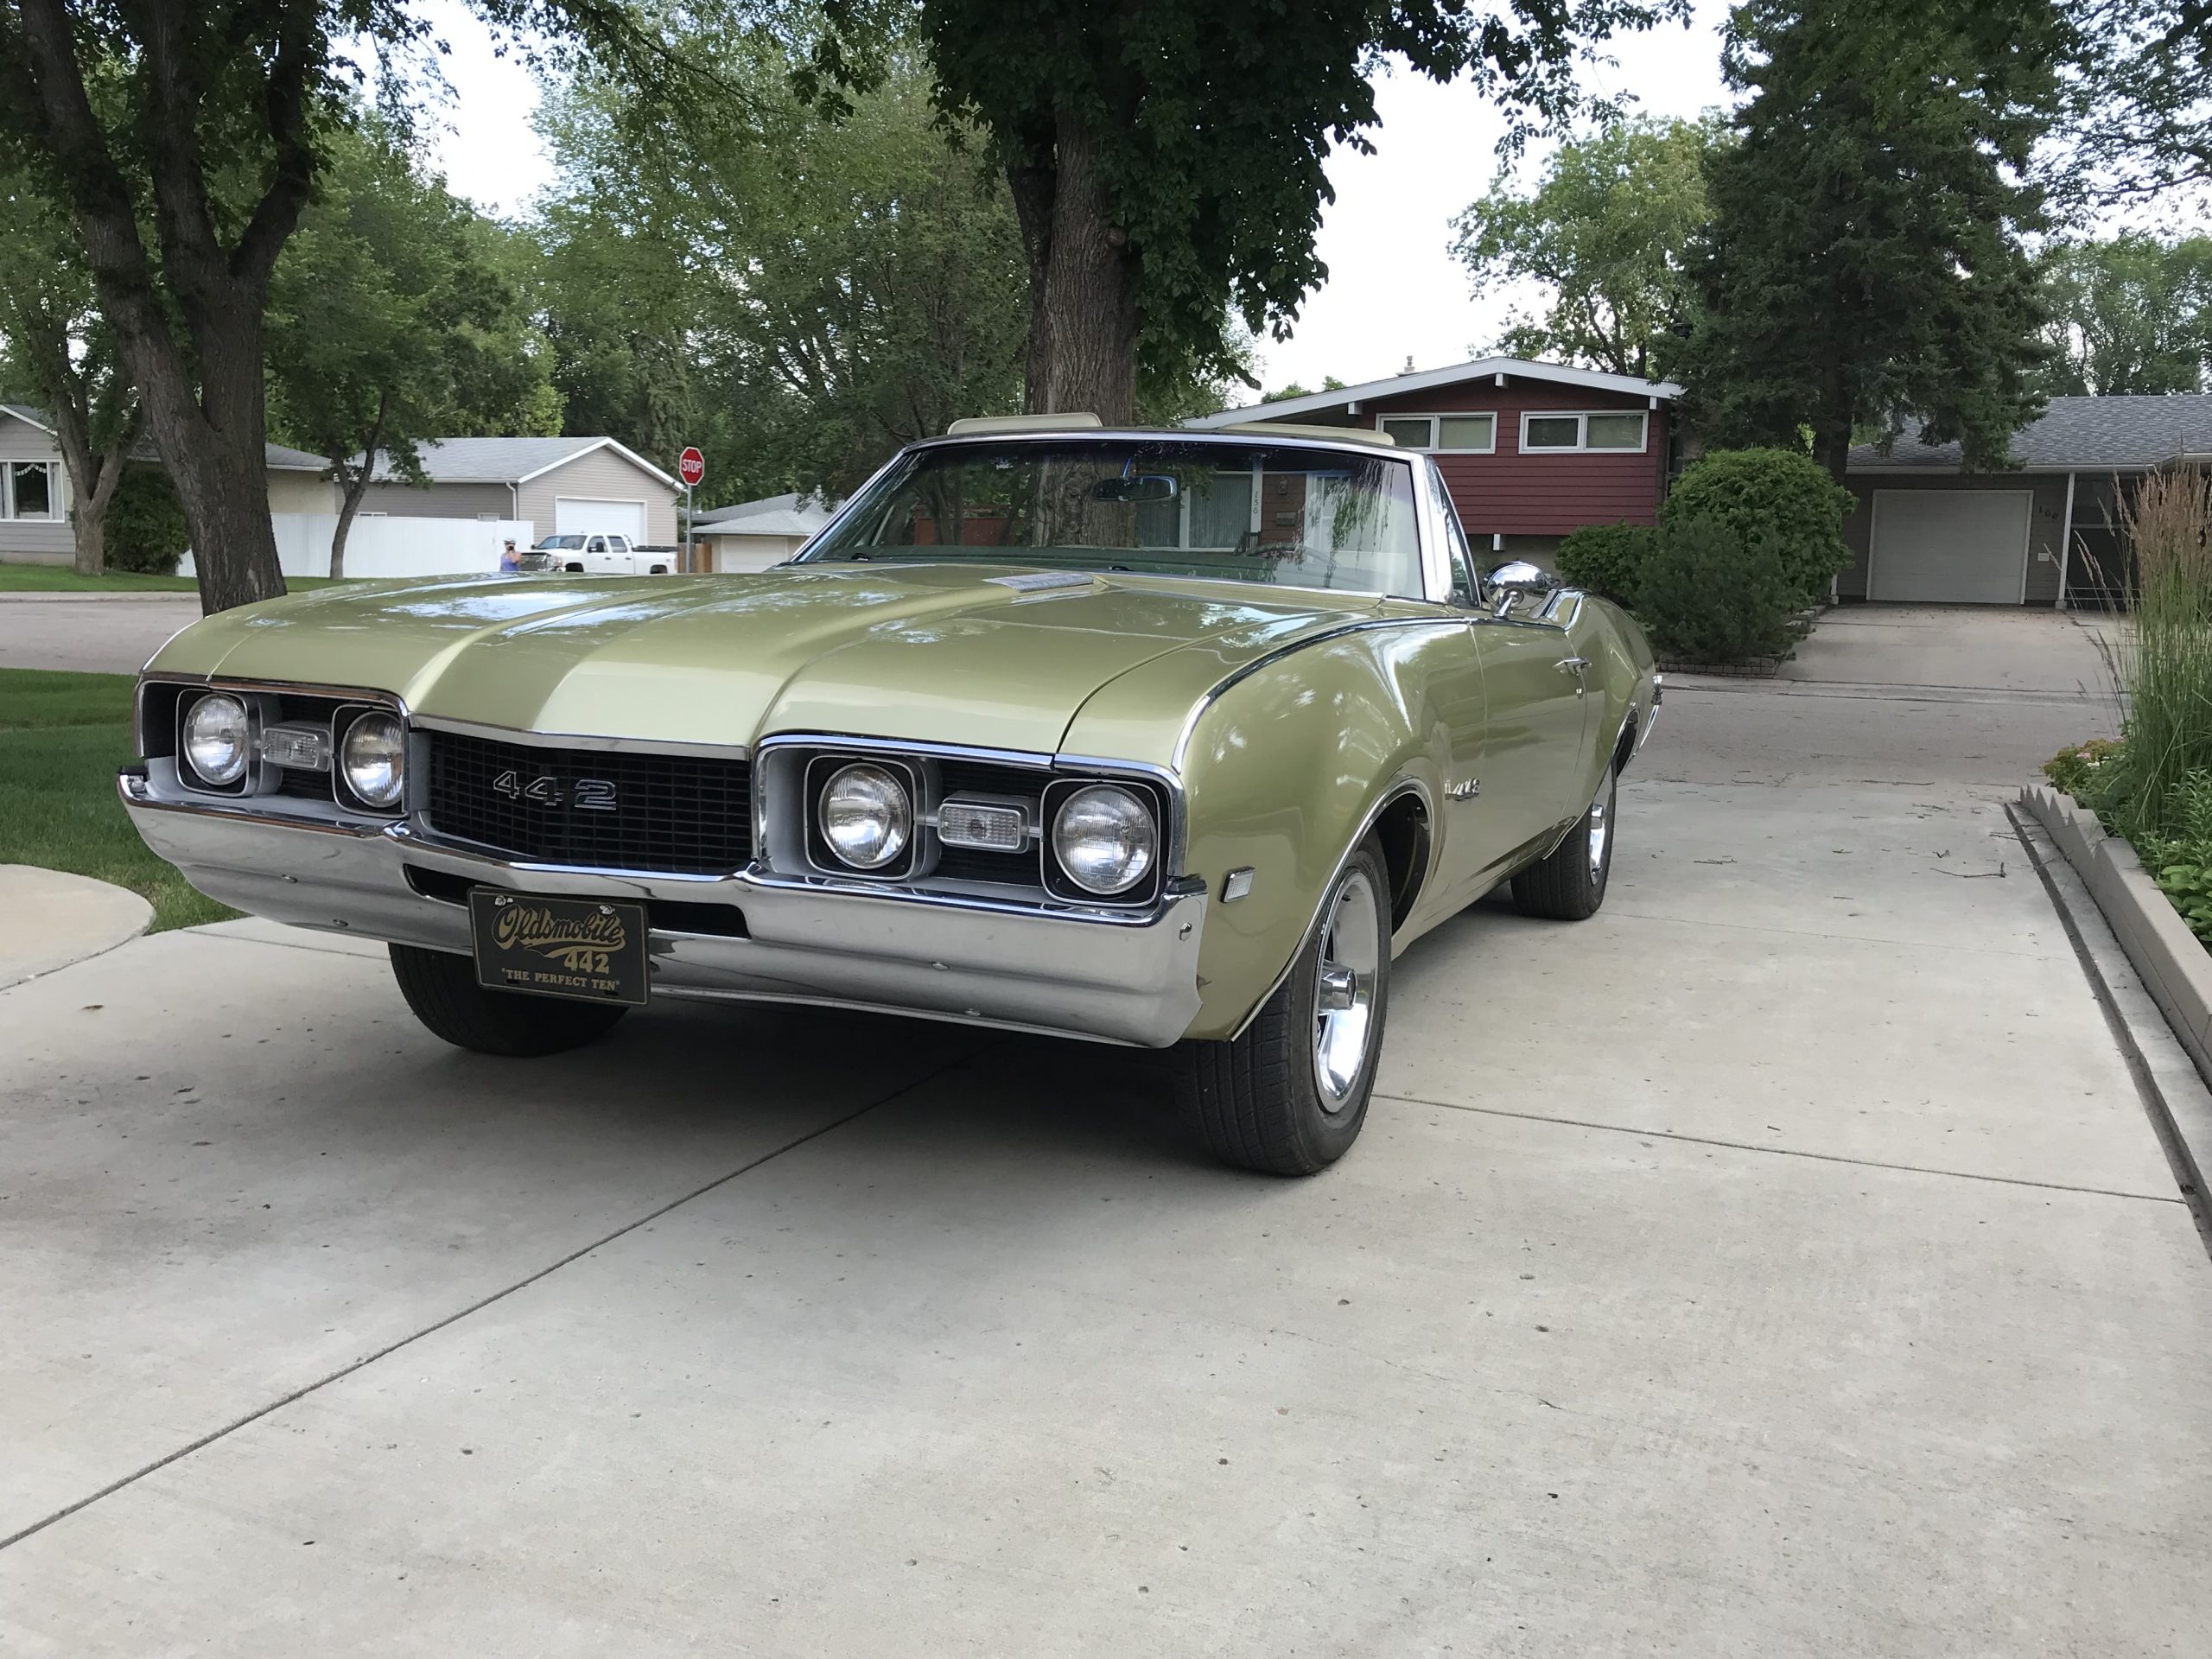 1968 Olds 442 Convertible